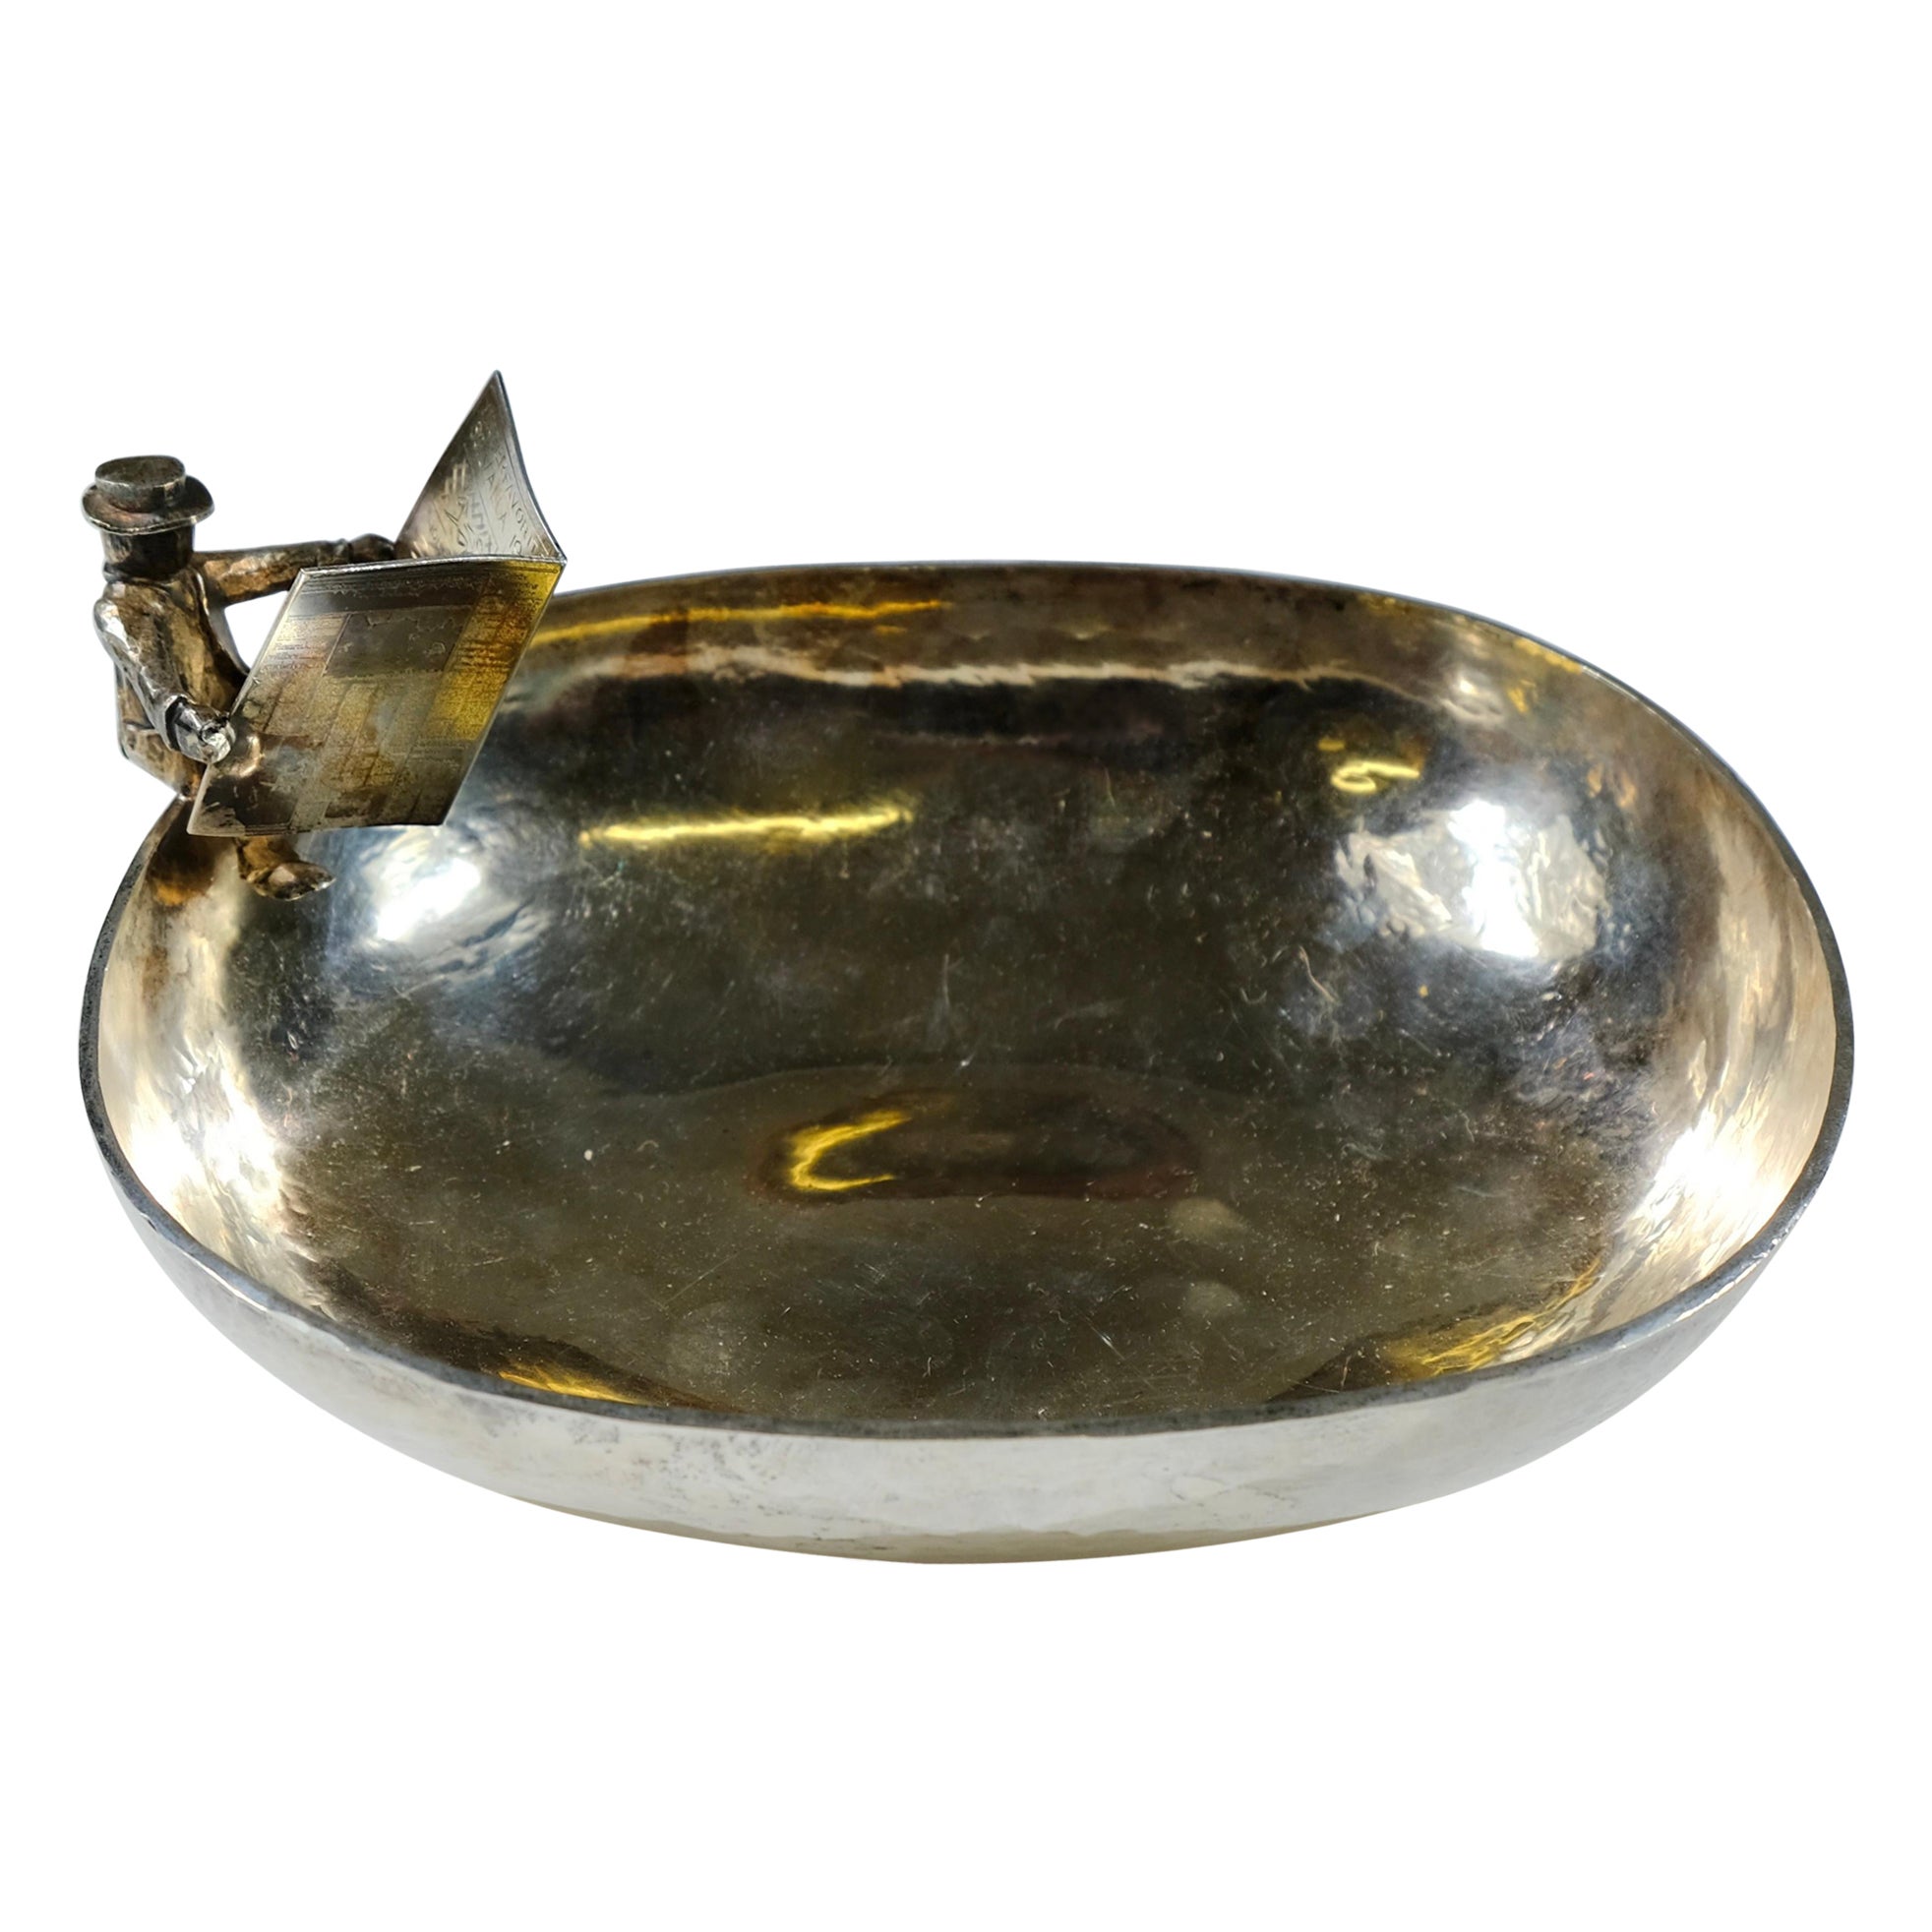 A decorative Swedish silver bowl made 1982 by silver Master Jan Lundgren For Sale